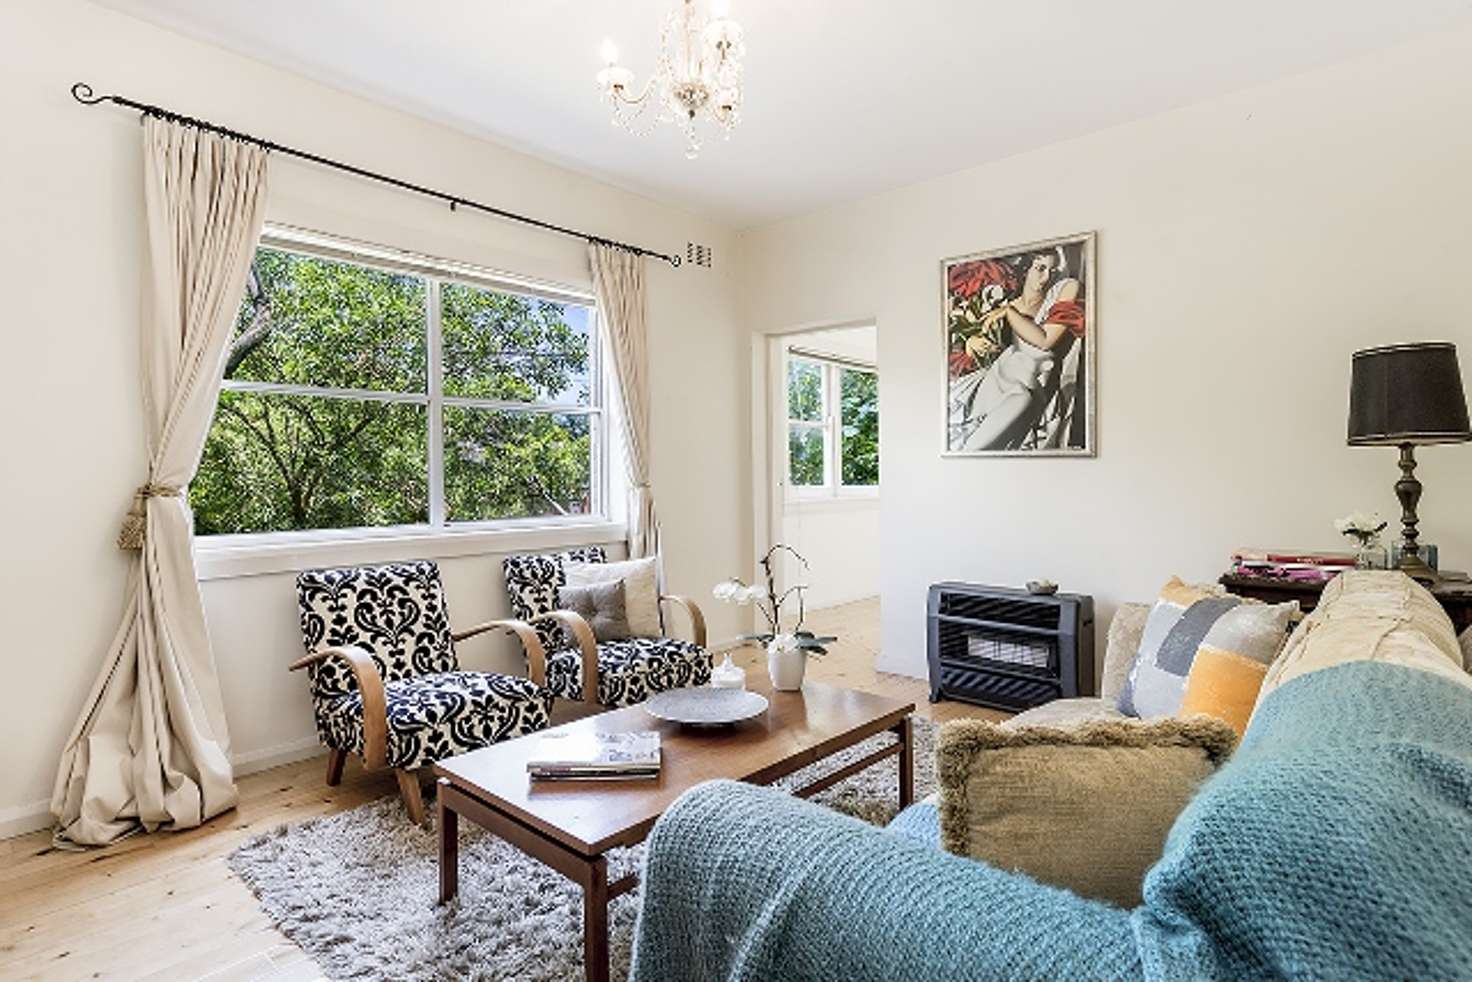 Main view of Homely apartment listing, 3/17 Doohat Ave, North Sydney NSW 2060